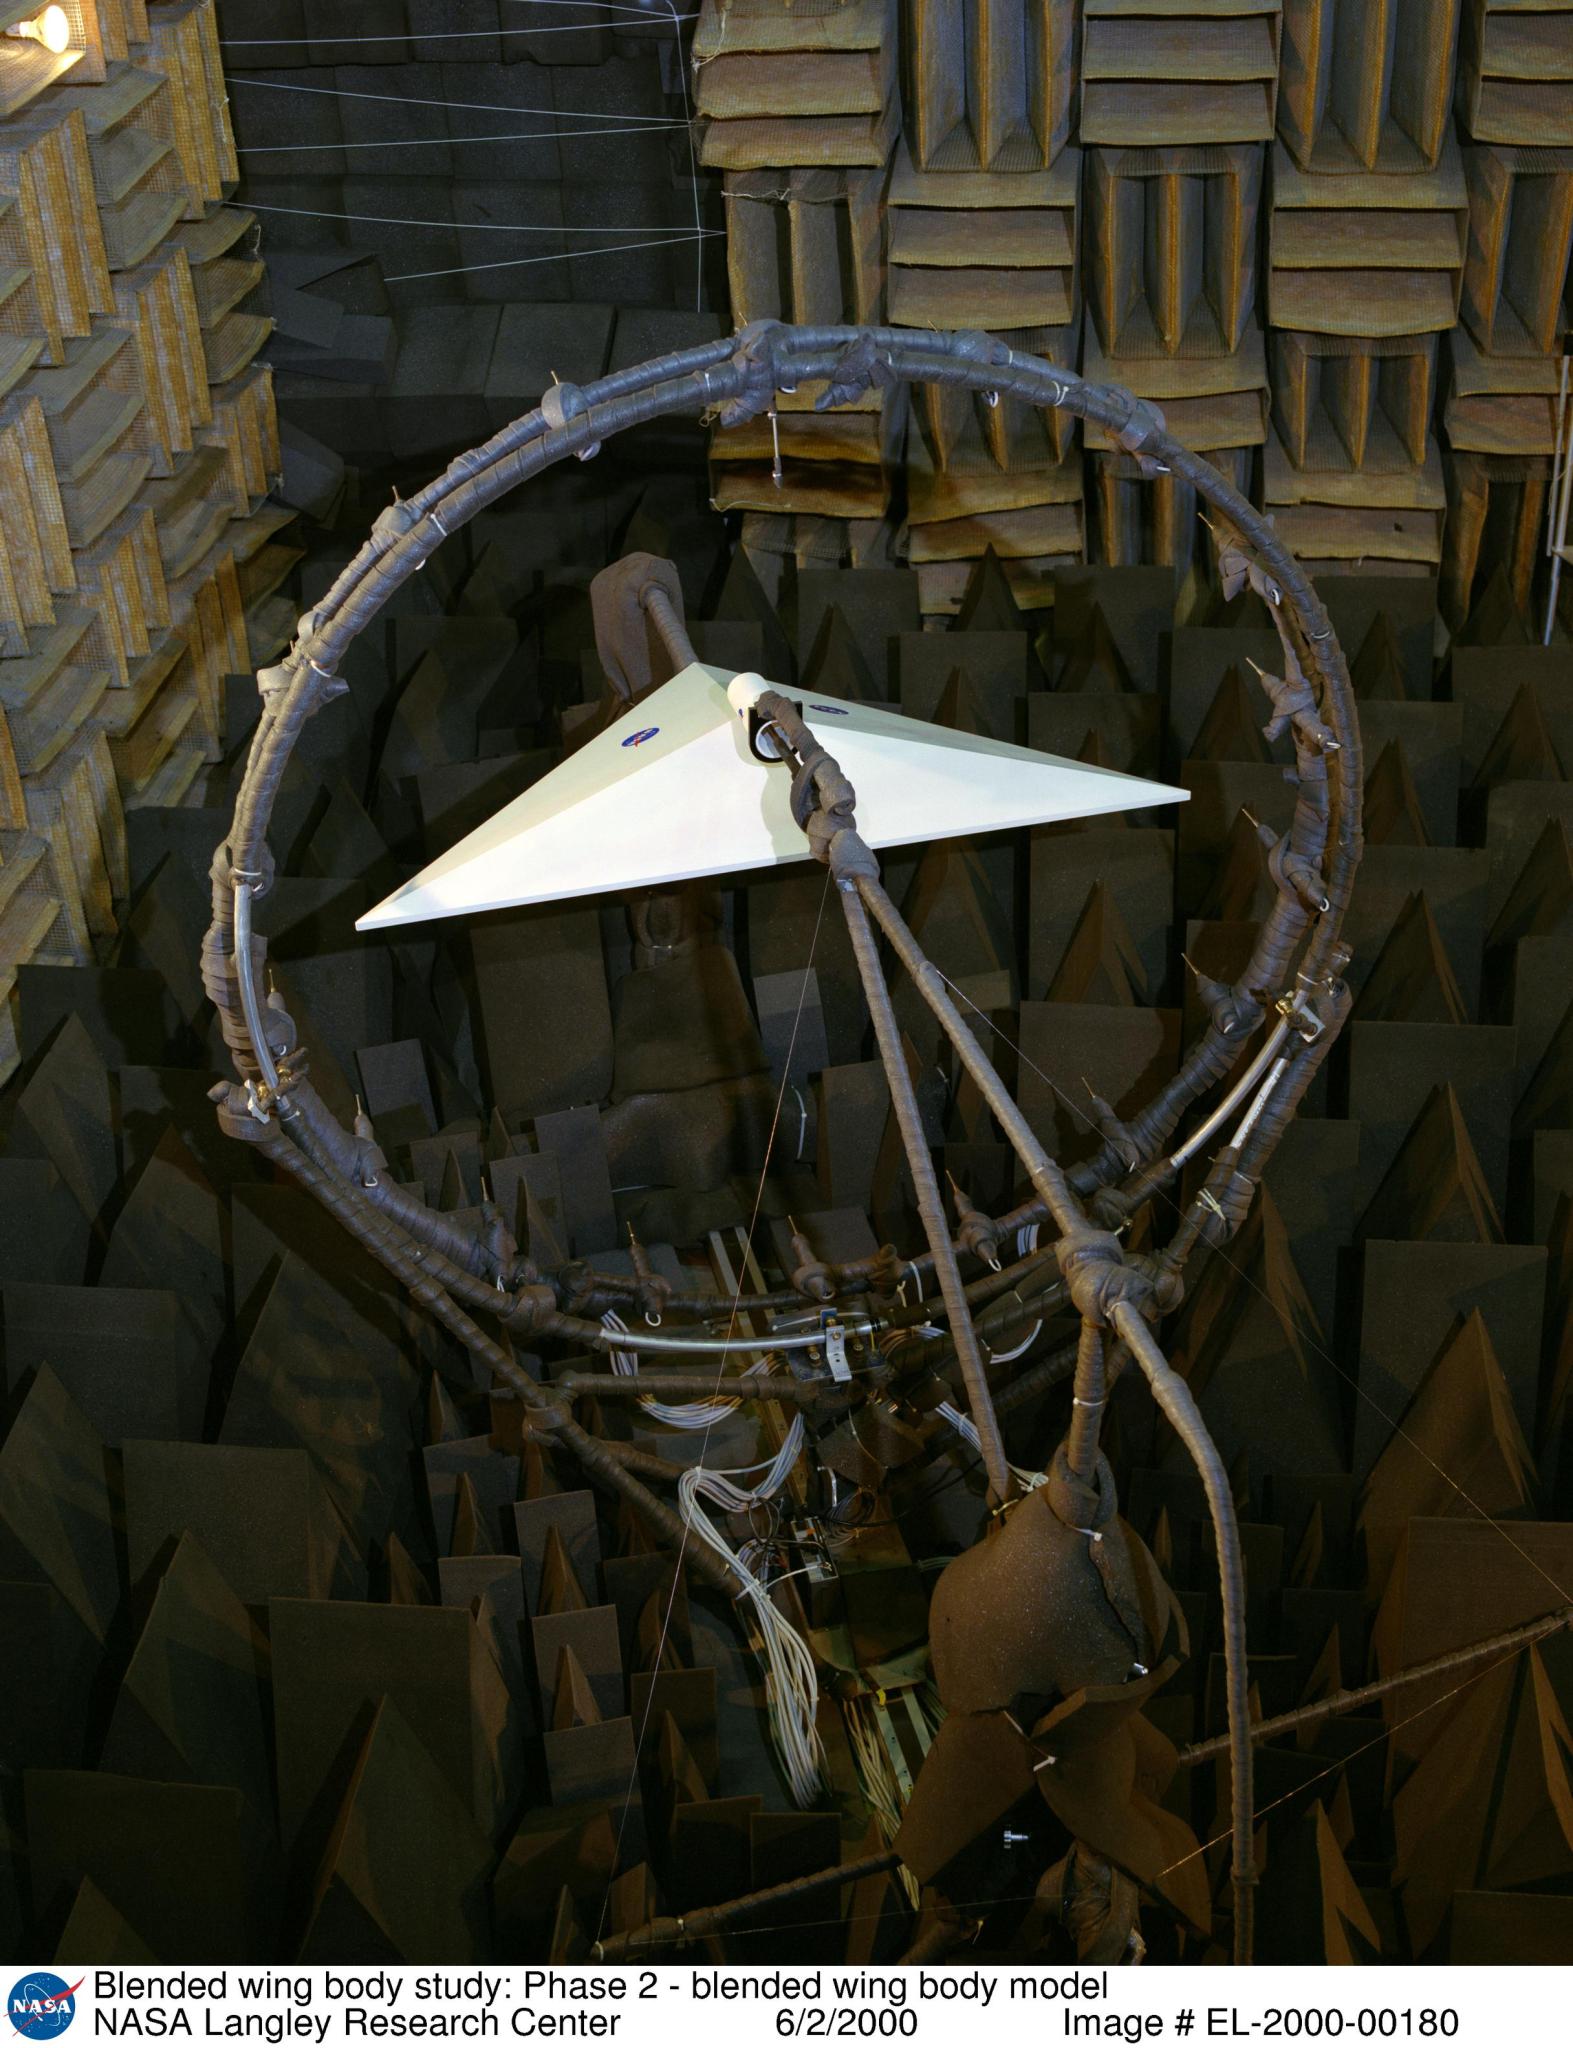 Blended Wing Body model installed inside the Langley Anechoic Noise Research Facility(B1218) in June 2000. A circular microphone boom that is used to measure noise around the model can also be seen.